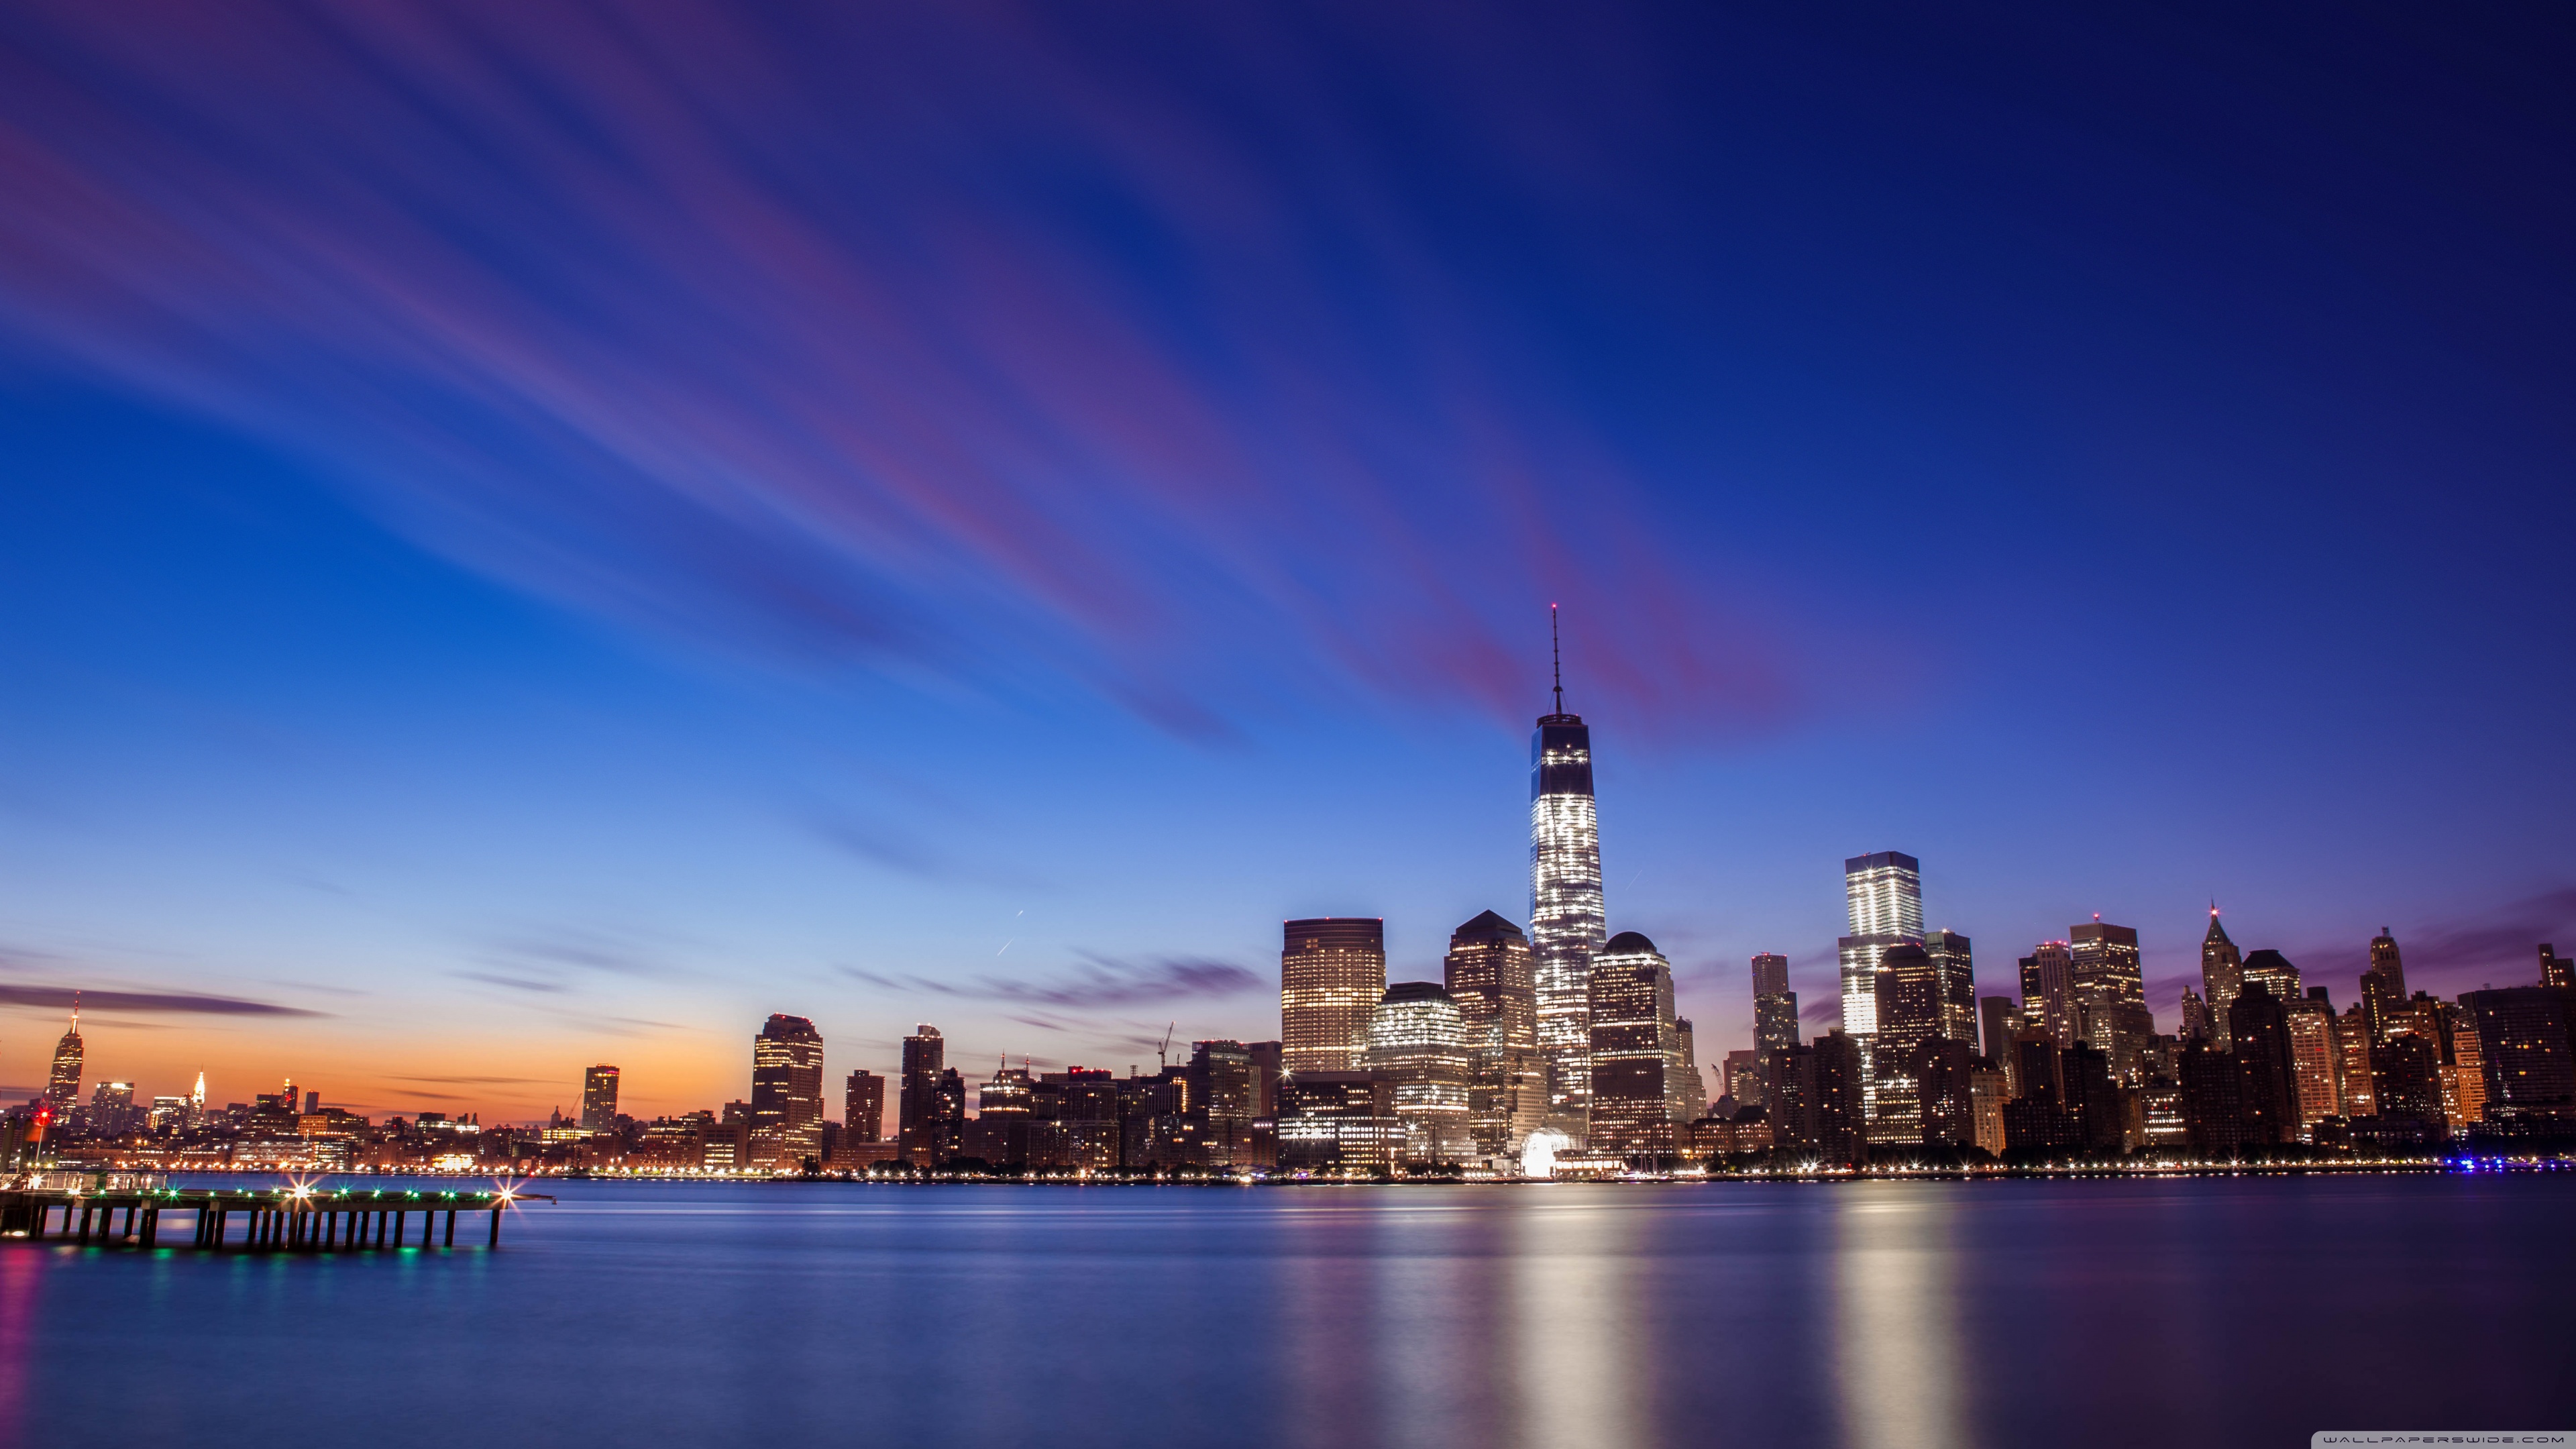 Cool Pictures City Skyline Hd Wallpaper Of City Hdwallpaper2013 - New York Skyline Hd , HD Wallpaper & Backgrounds